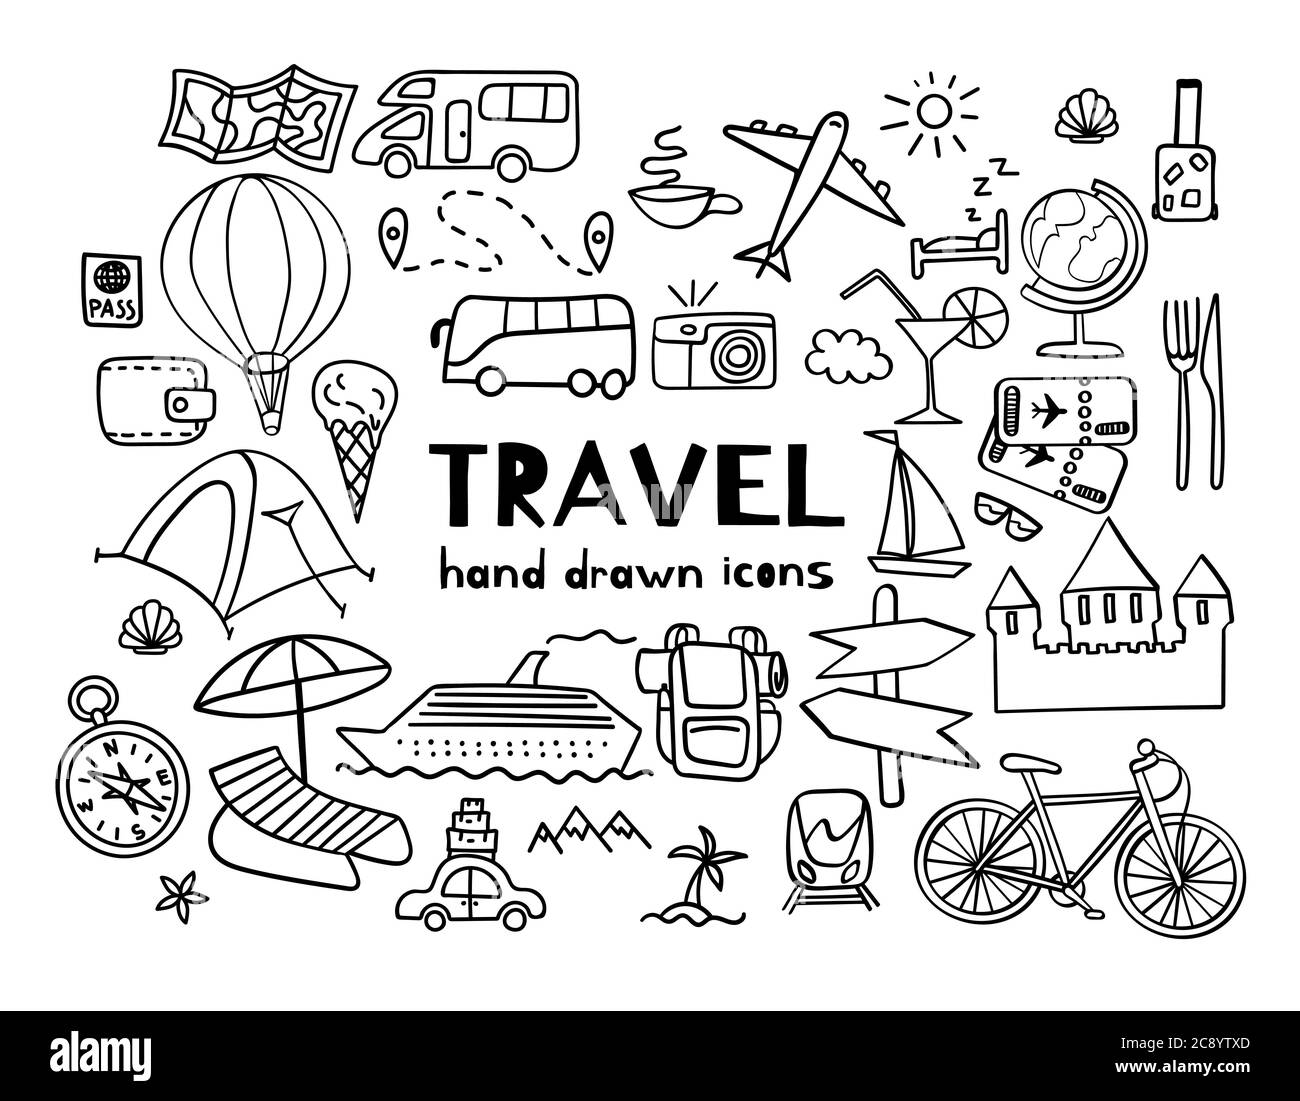 Hand drawn travel icons. Summer vacation doodles isolated on white background. Vector illustration. Stock Vector